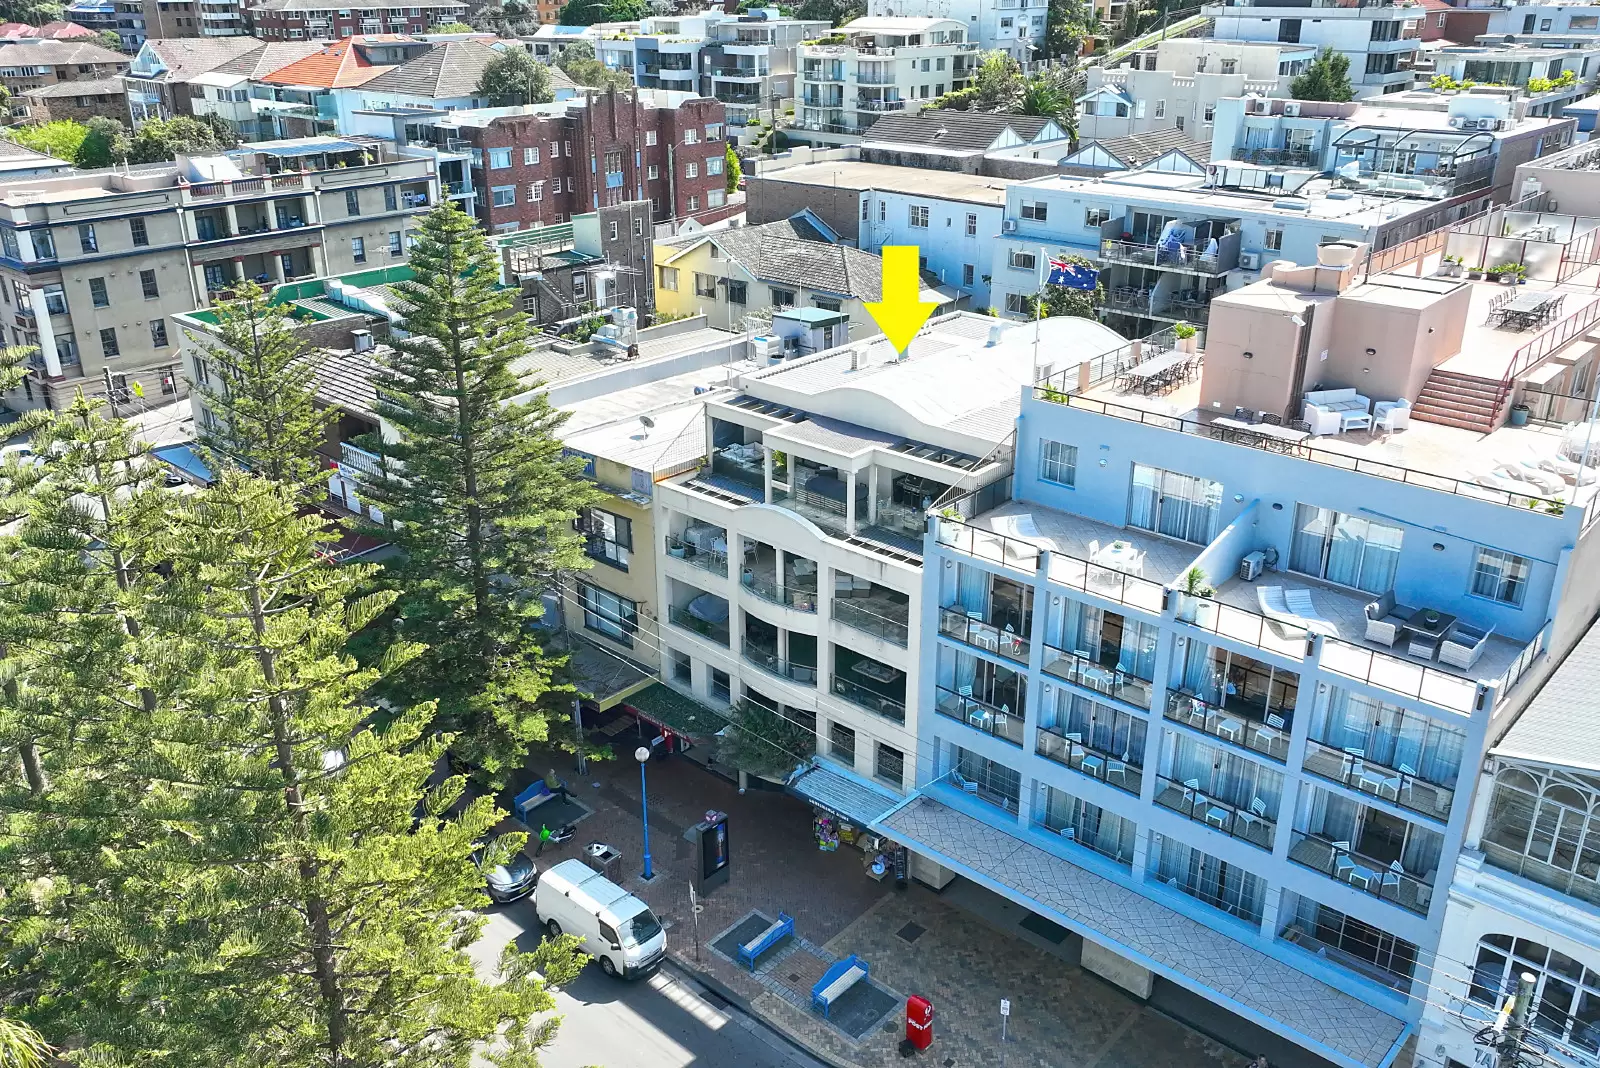 Photo #10: 5/155-159 Dolphin Street, Coogee - Sold by Sydney Sotheby's International Realty